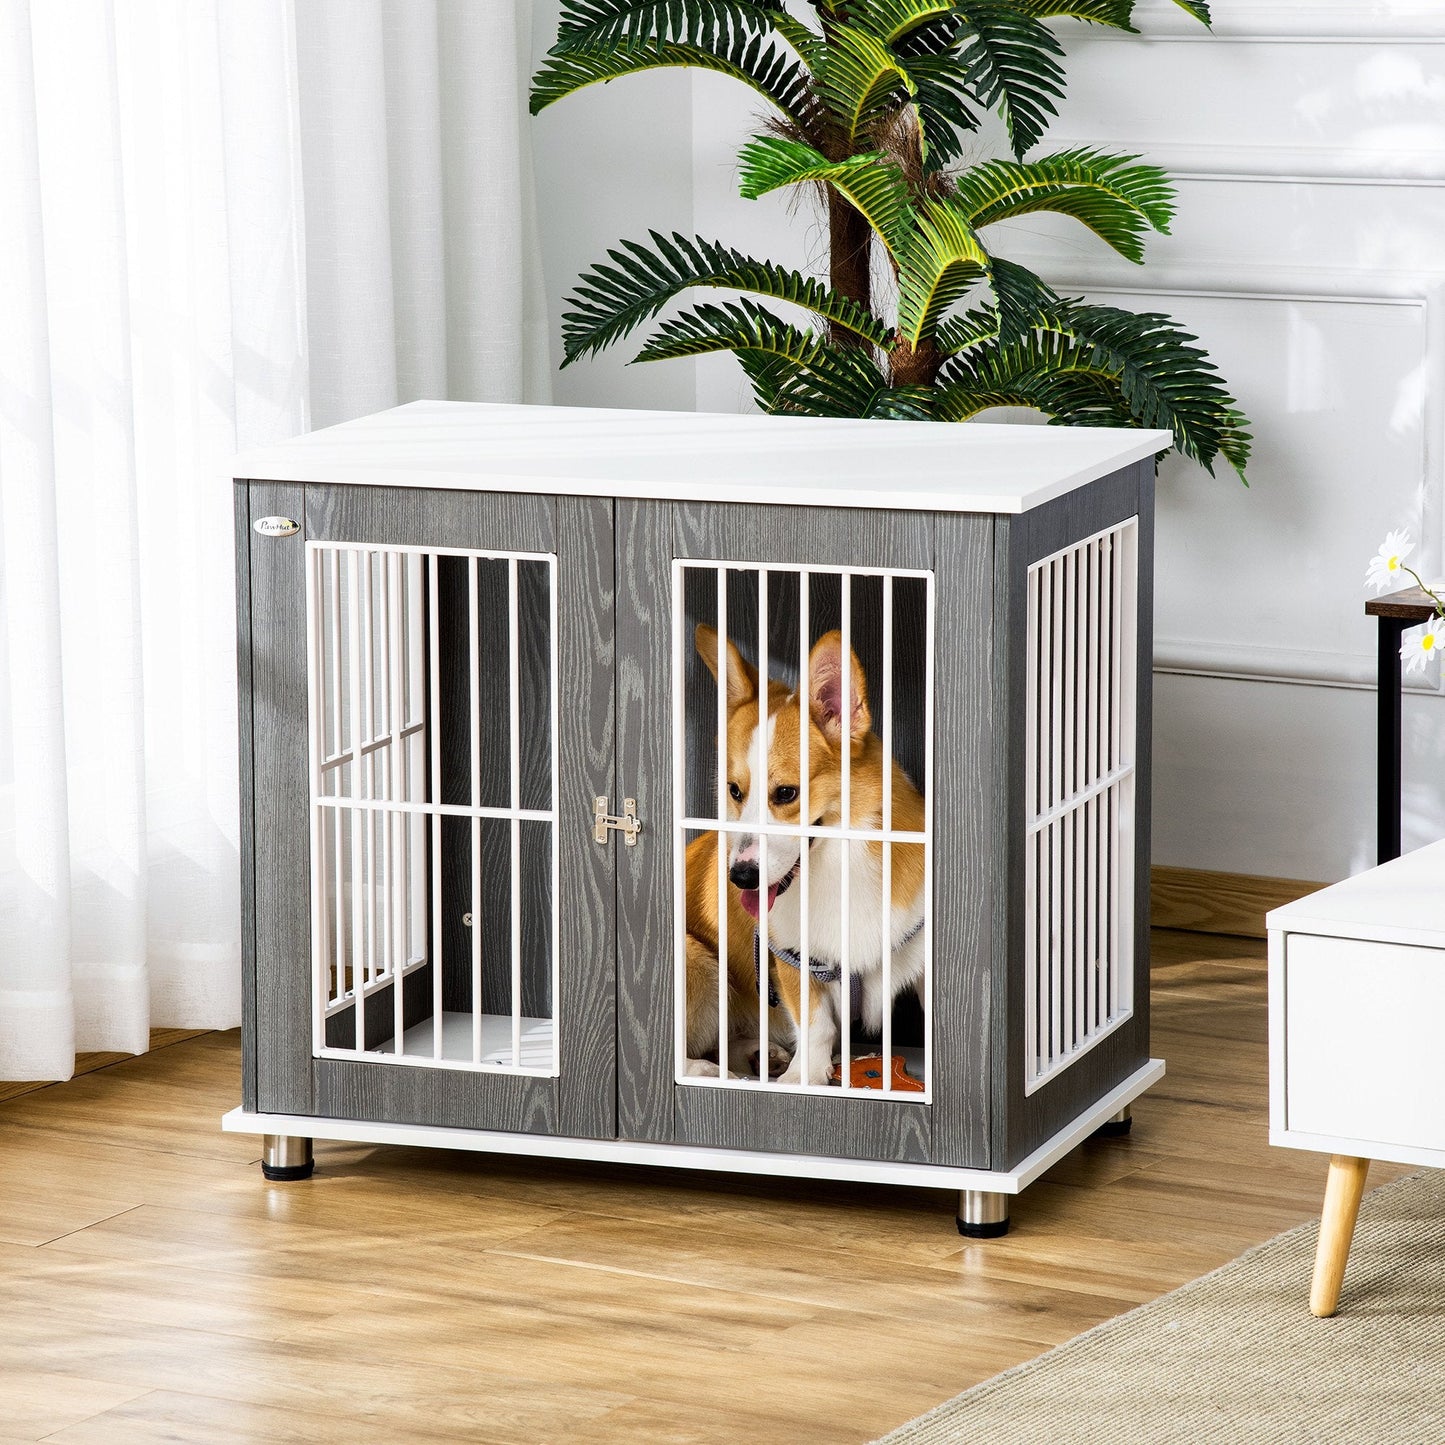 Pet Supplies-34'' Wooden Dog Crate, Modern Wire Dog Crate, Dog Kennel with Door, Lock & Adjustable Foot Pads, for Small and Medium Dogs, Gray and White - Outdoor Style Company